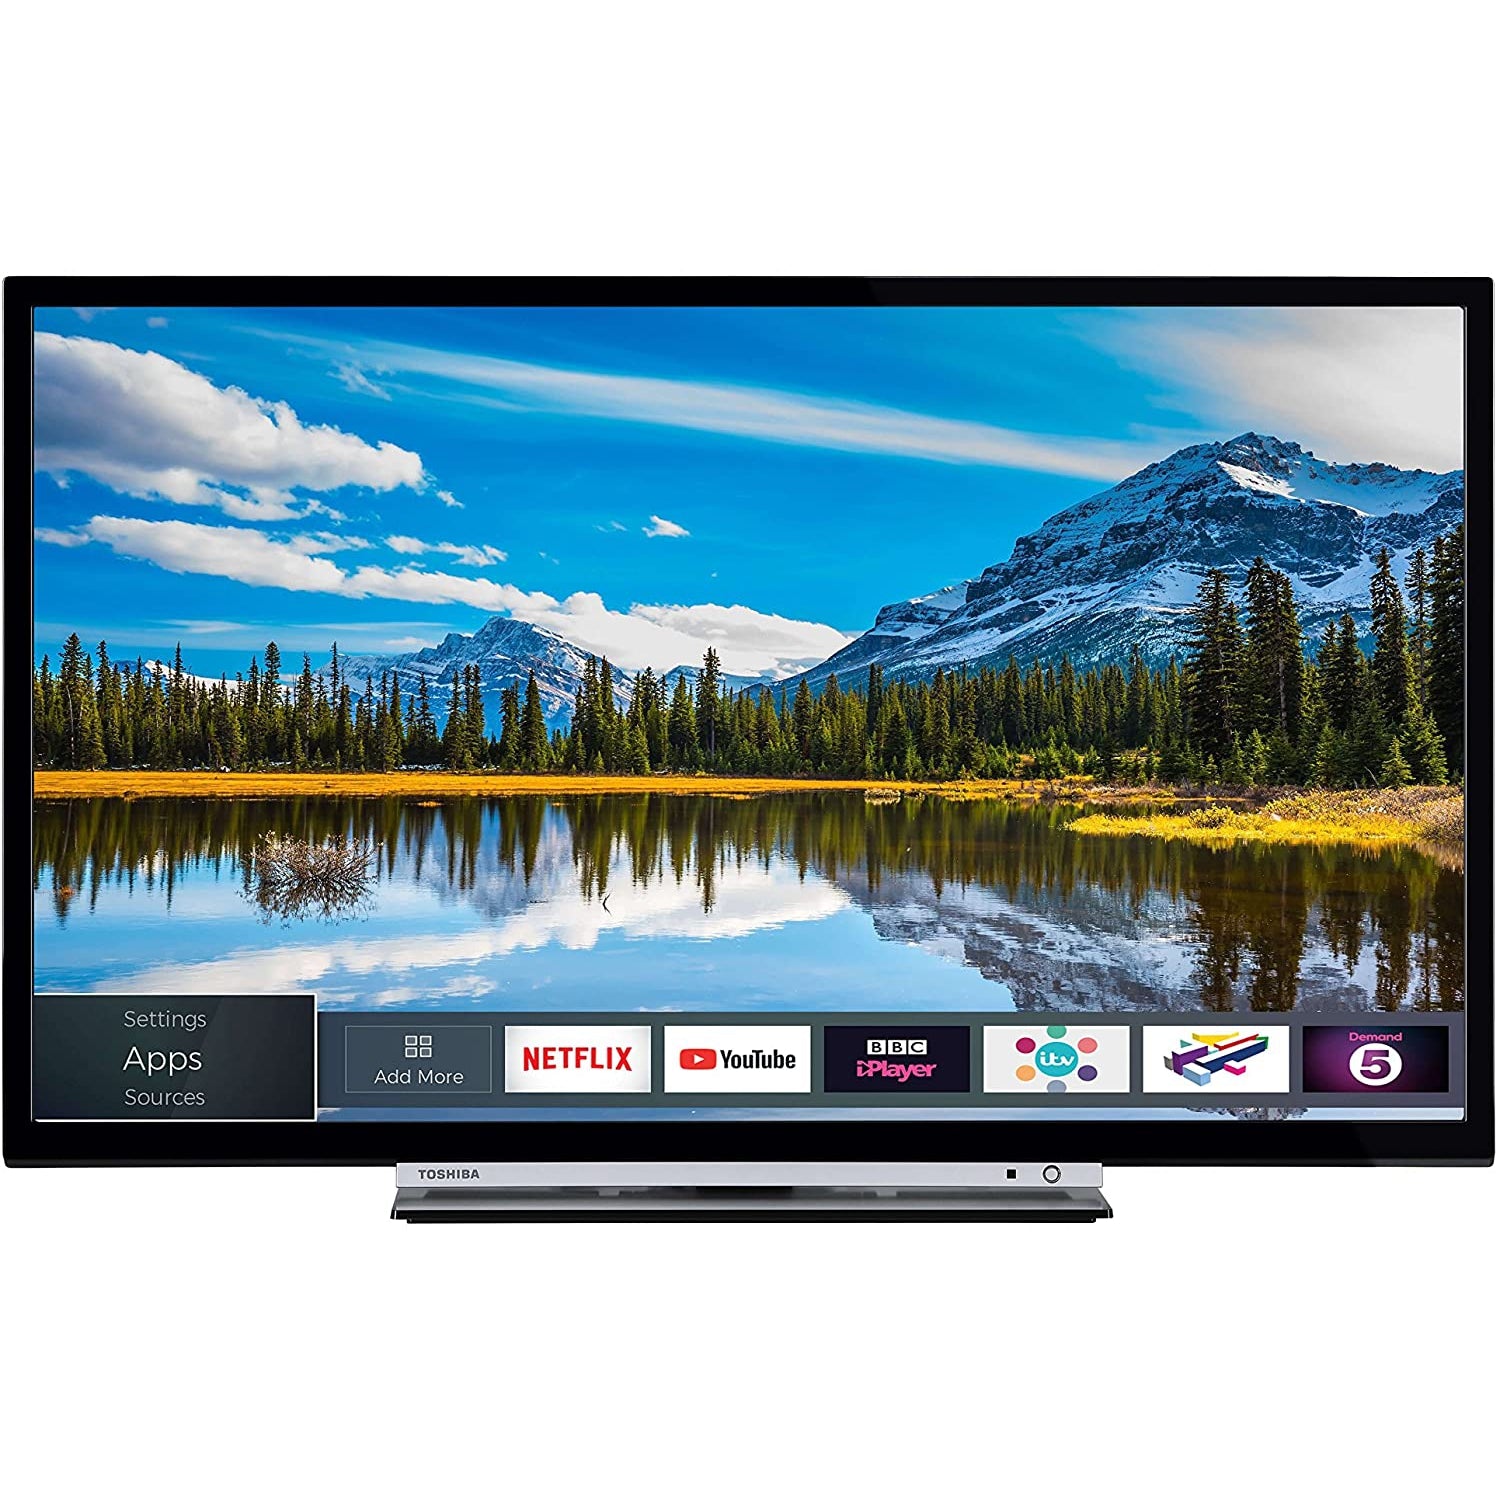 Toshiba 24W3863DB LED HD Ready 720p Smart TV, 24" with Freeview HD, Black - (Missing Stand)